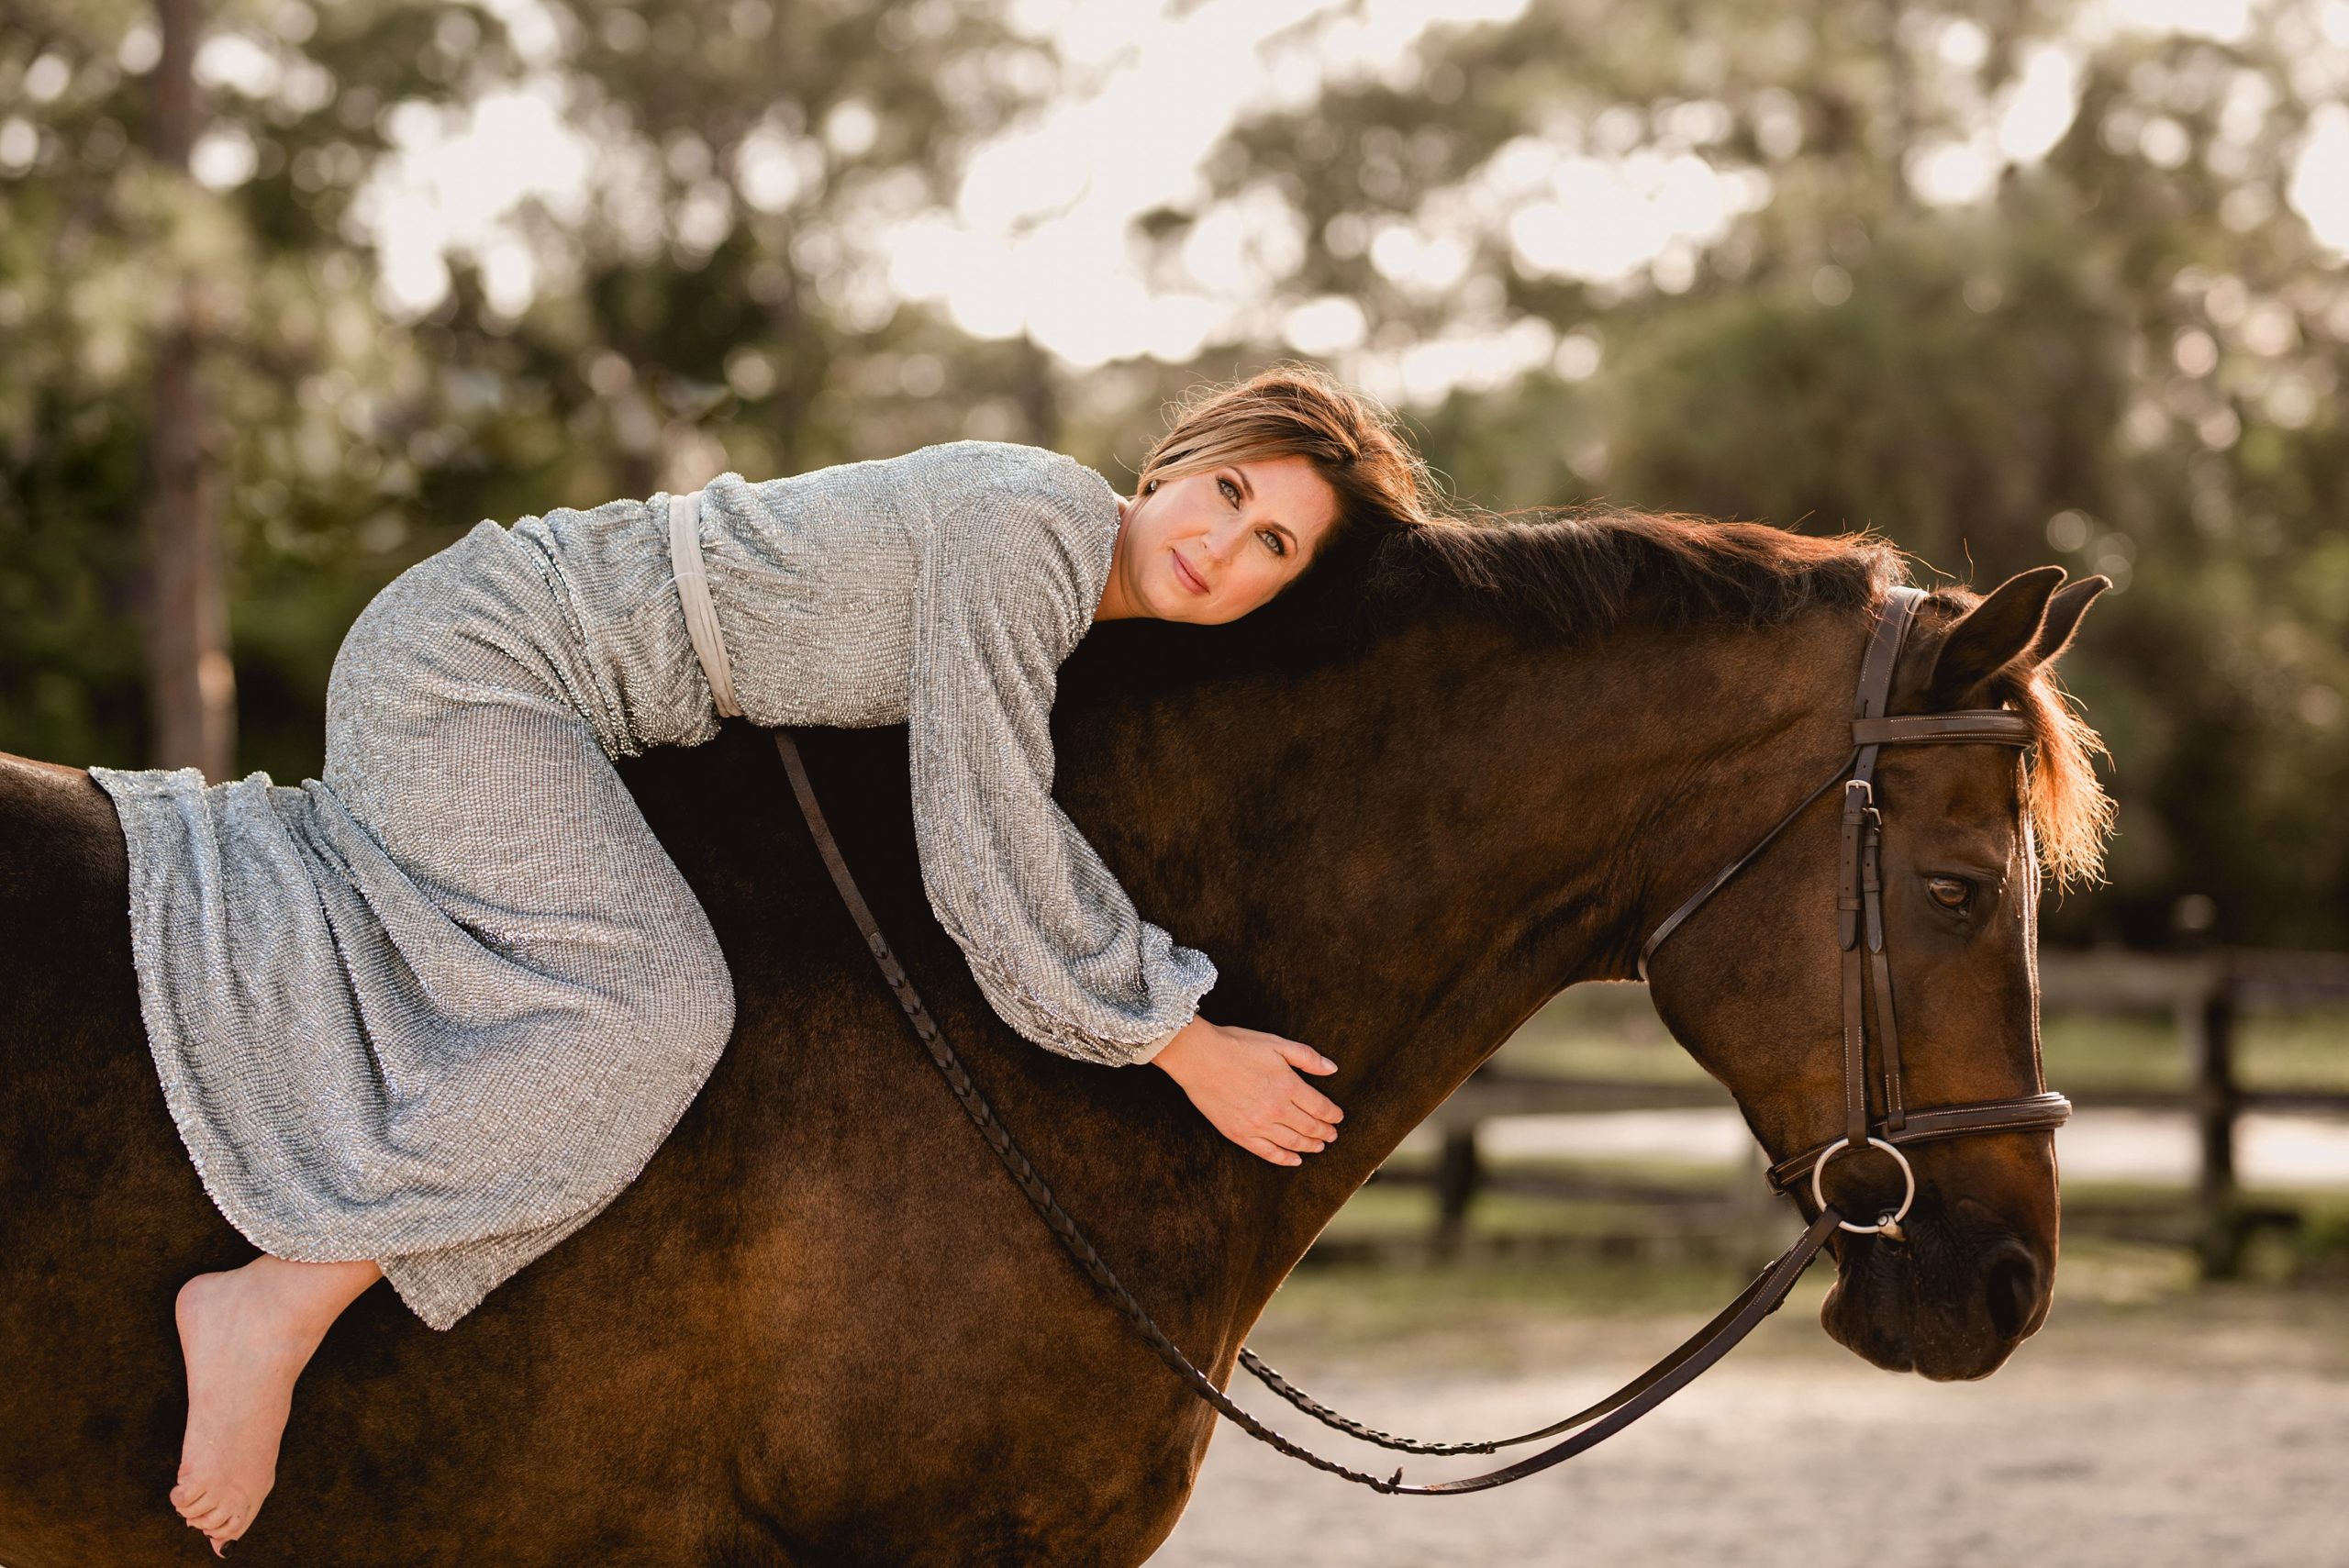 Horse and rider photos in Wellington. Sunset, golden hour, bareback riding.